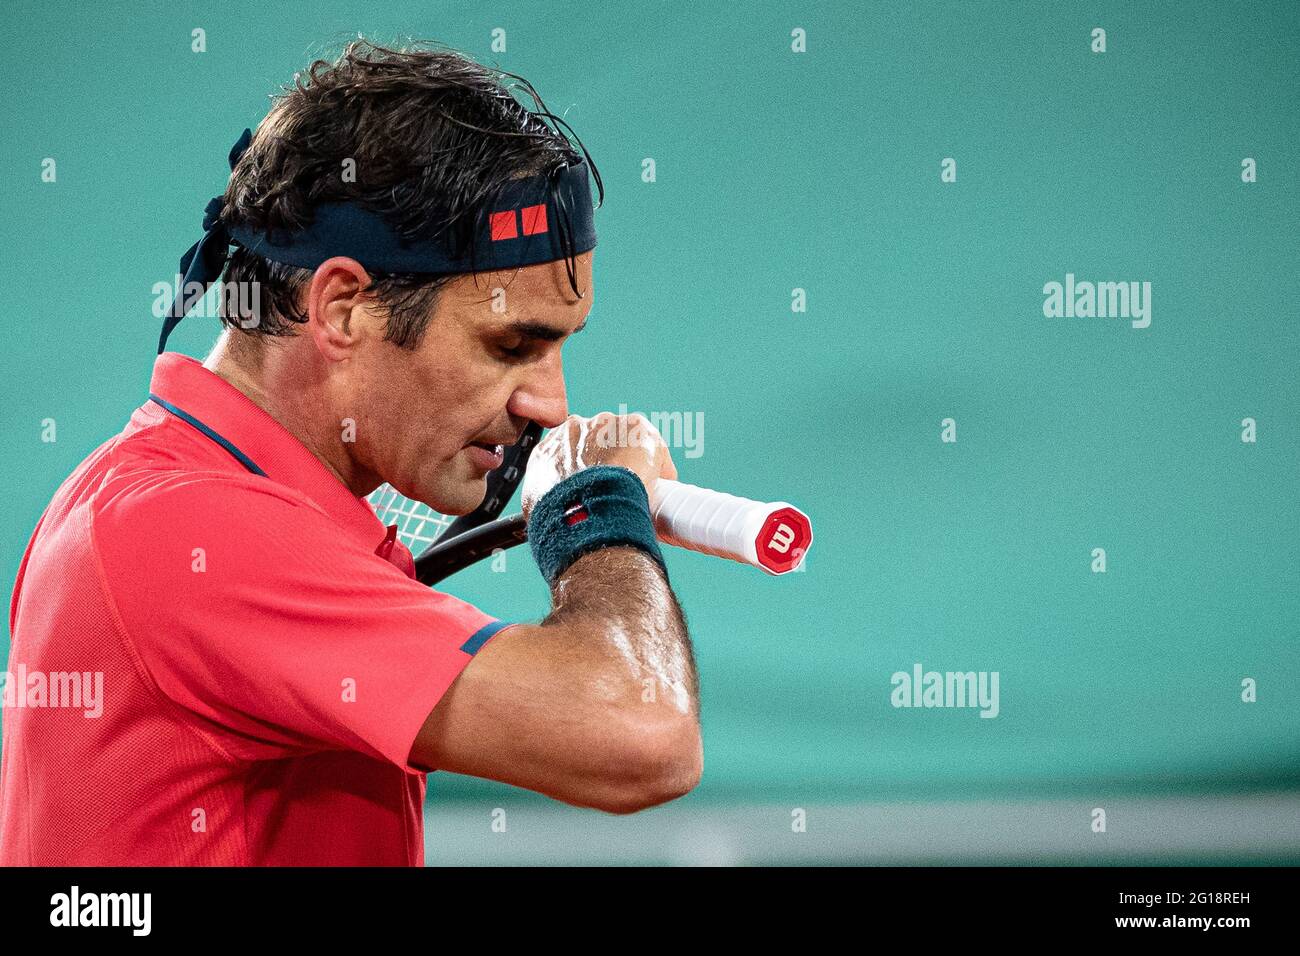 Paris, France. 5th June, 2021. Roger Federer of Switzerland reacts during  the men's singles third round match between Roger Federer of Switzerland  and Dominik Koepfer of Germany at the French Open tennis